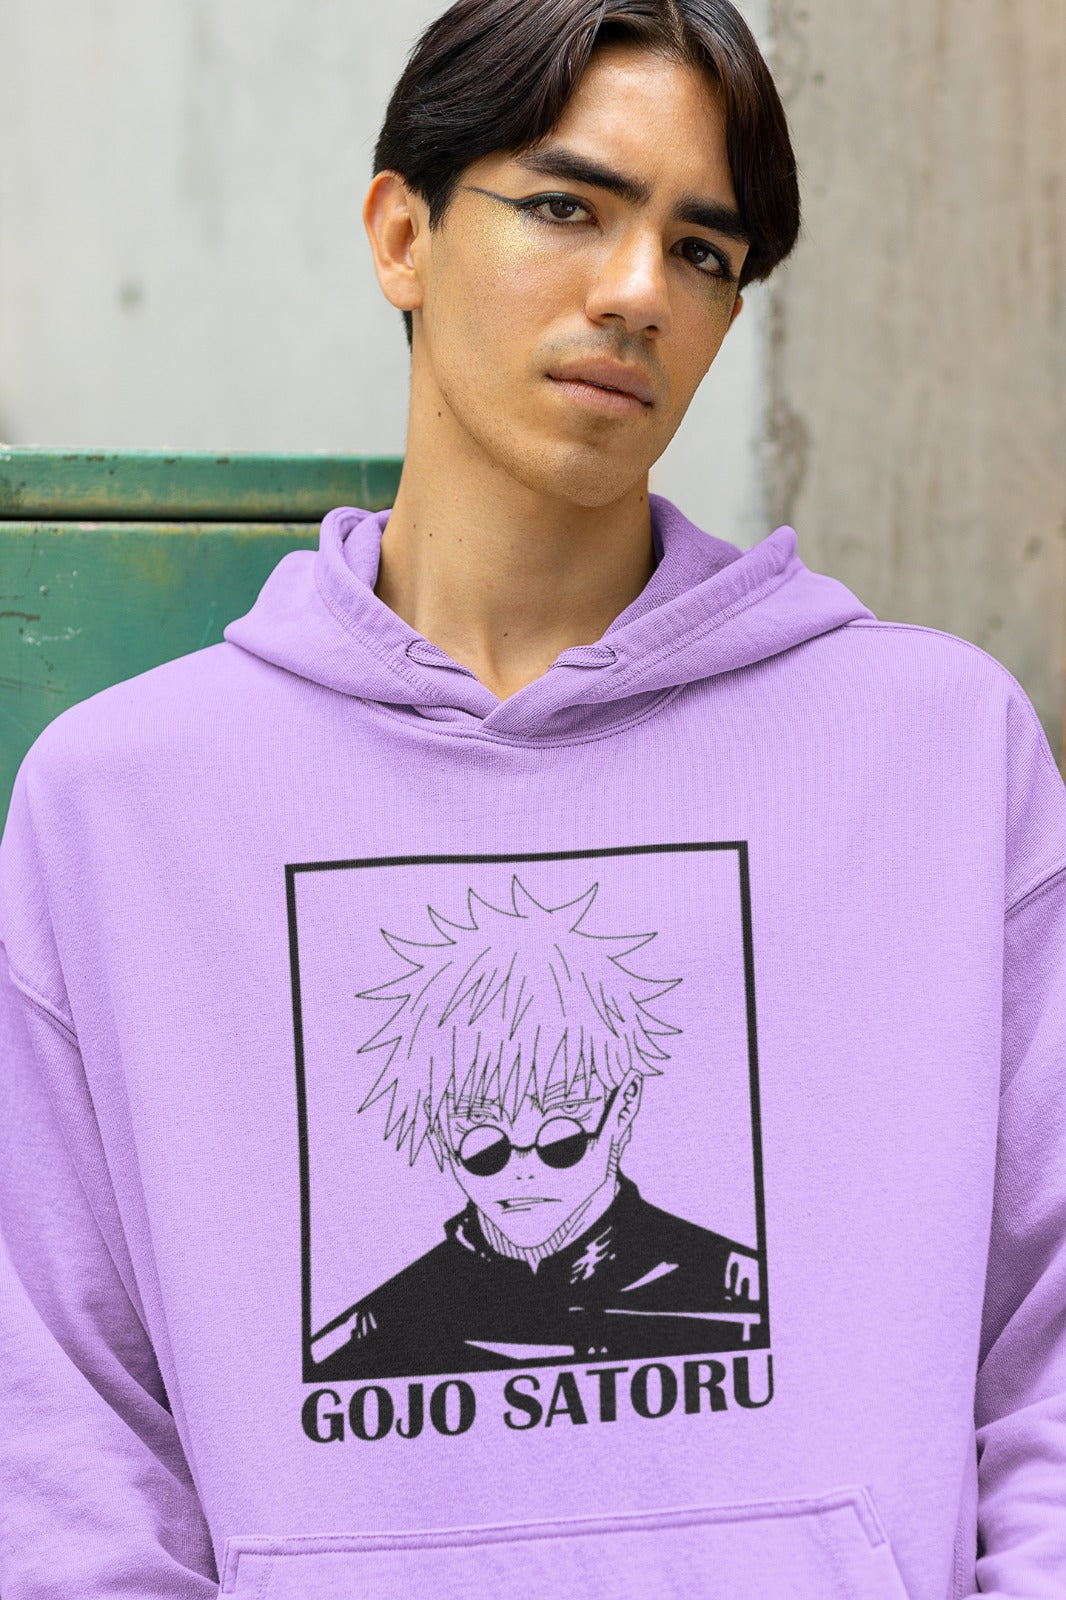   Embrace the mystique of Jujutsu Kaisen with our Lavender Oversized Hoodie featuring the enigmatic Gojo Satoru. In classic black and white, his image radiates a unique charm. With 'Gojo Satoru' boldly written in English beneath, this hoodie is a blend of style and anime passion. Whether you're a fan of the show or simply a fashion enthusiast, this comfy, chic hoodie is a must-have. Make a bold statement with the Lavender Gojo Satoru Oversized Hoodie!